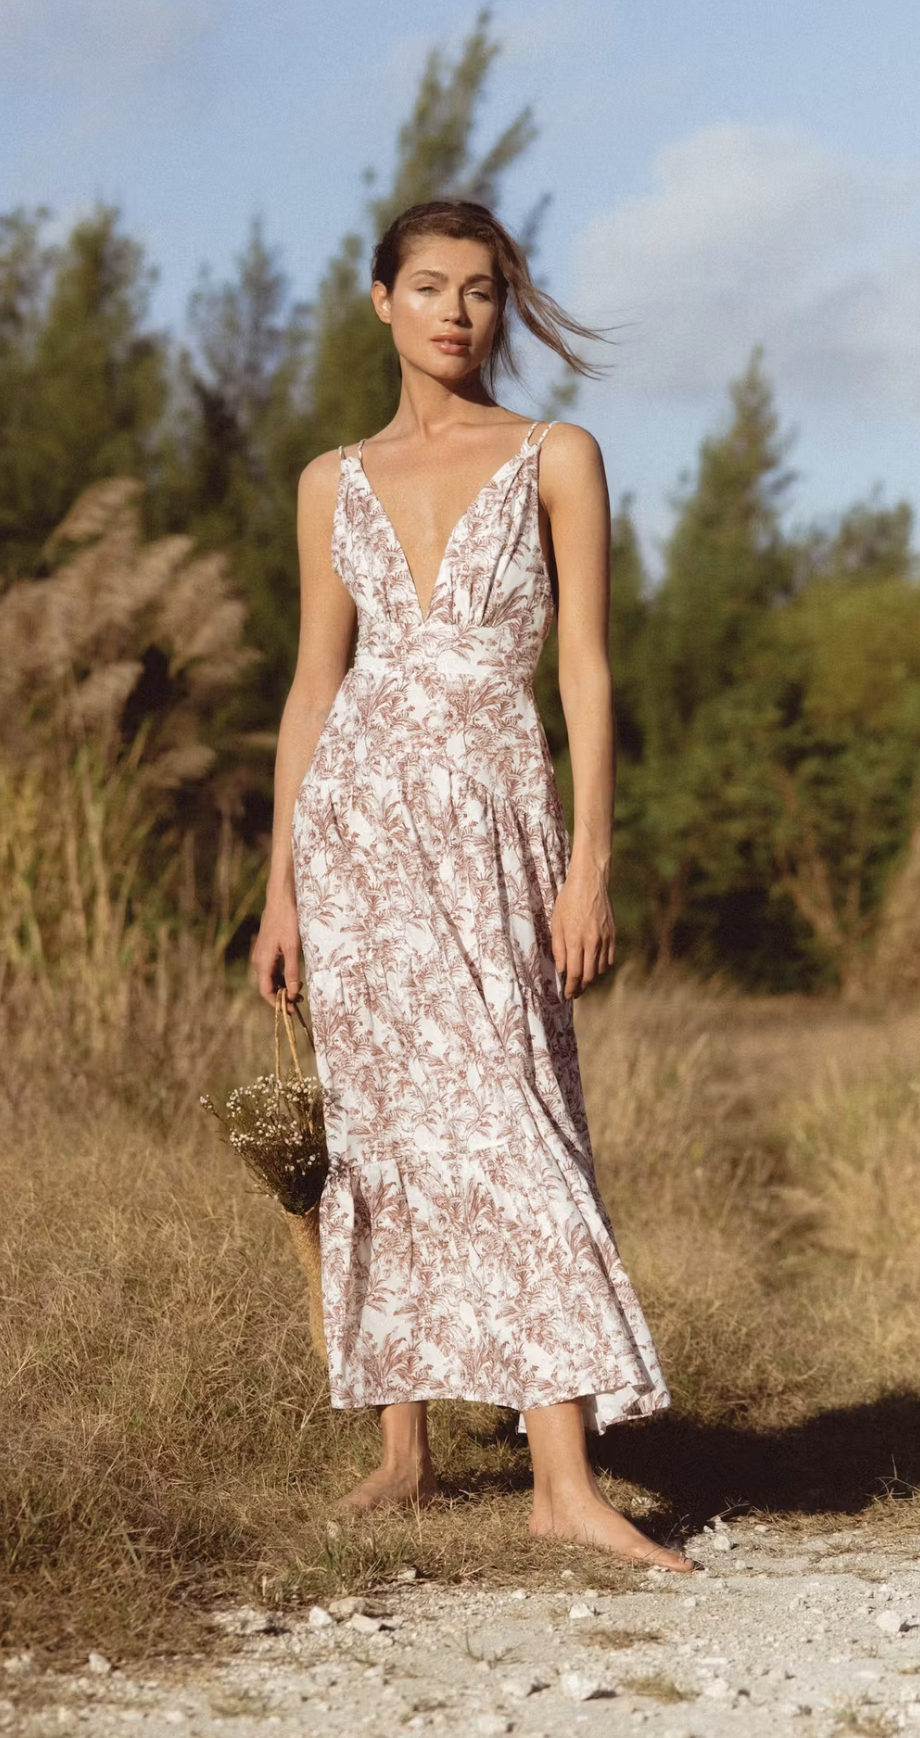 a model wearing the dress in white with a brown floral pattern